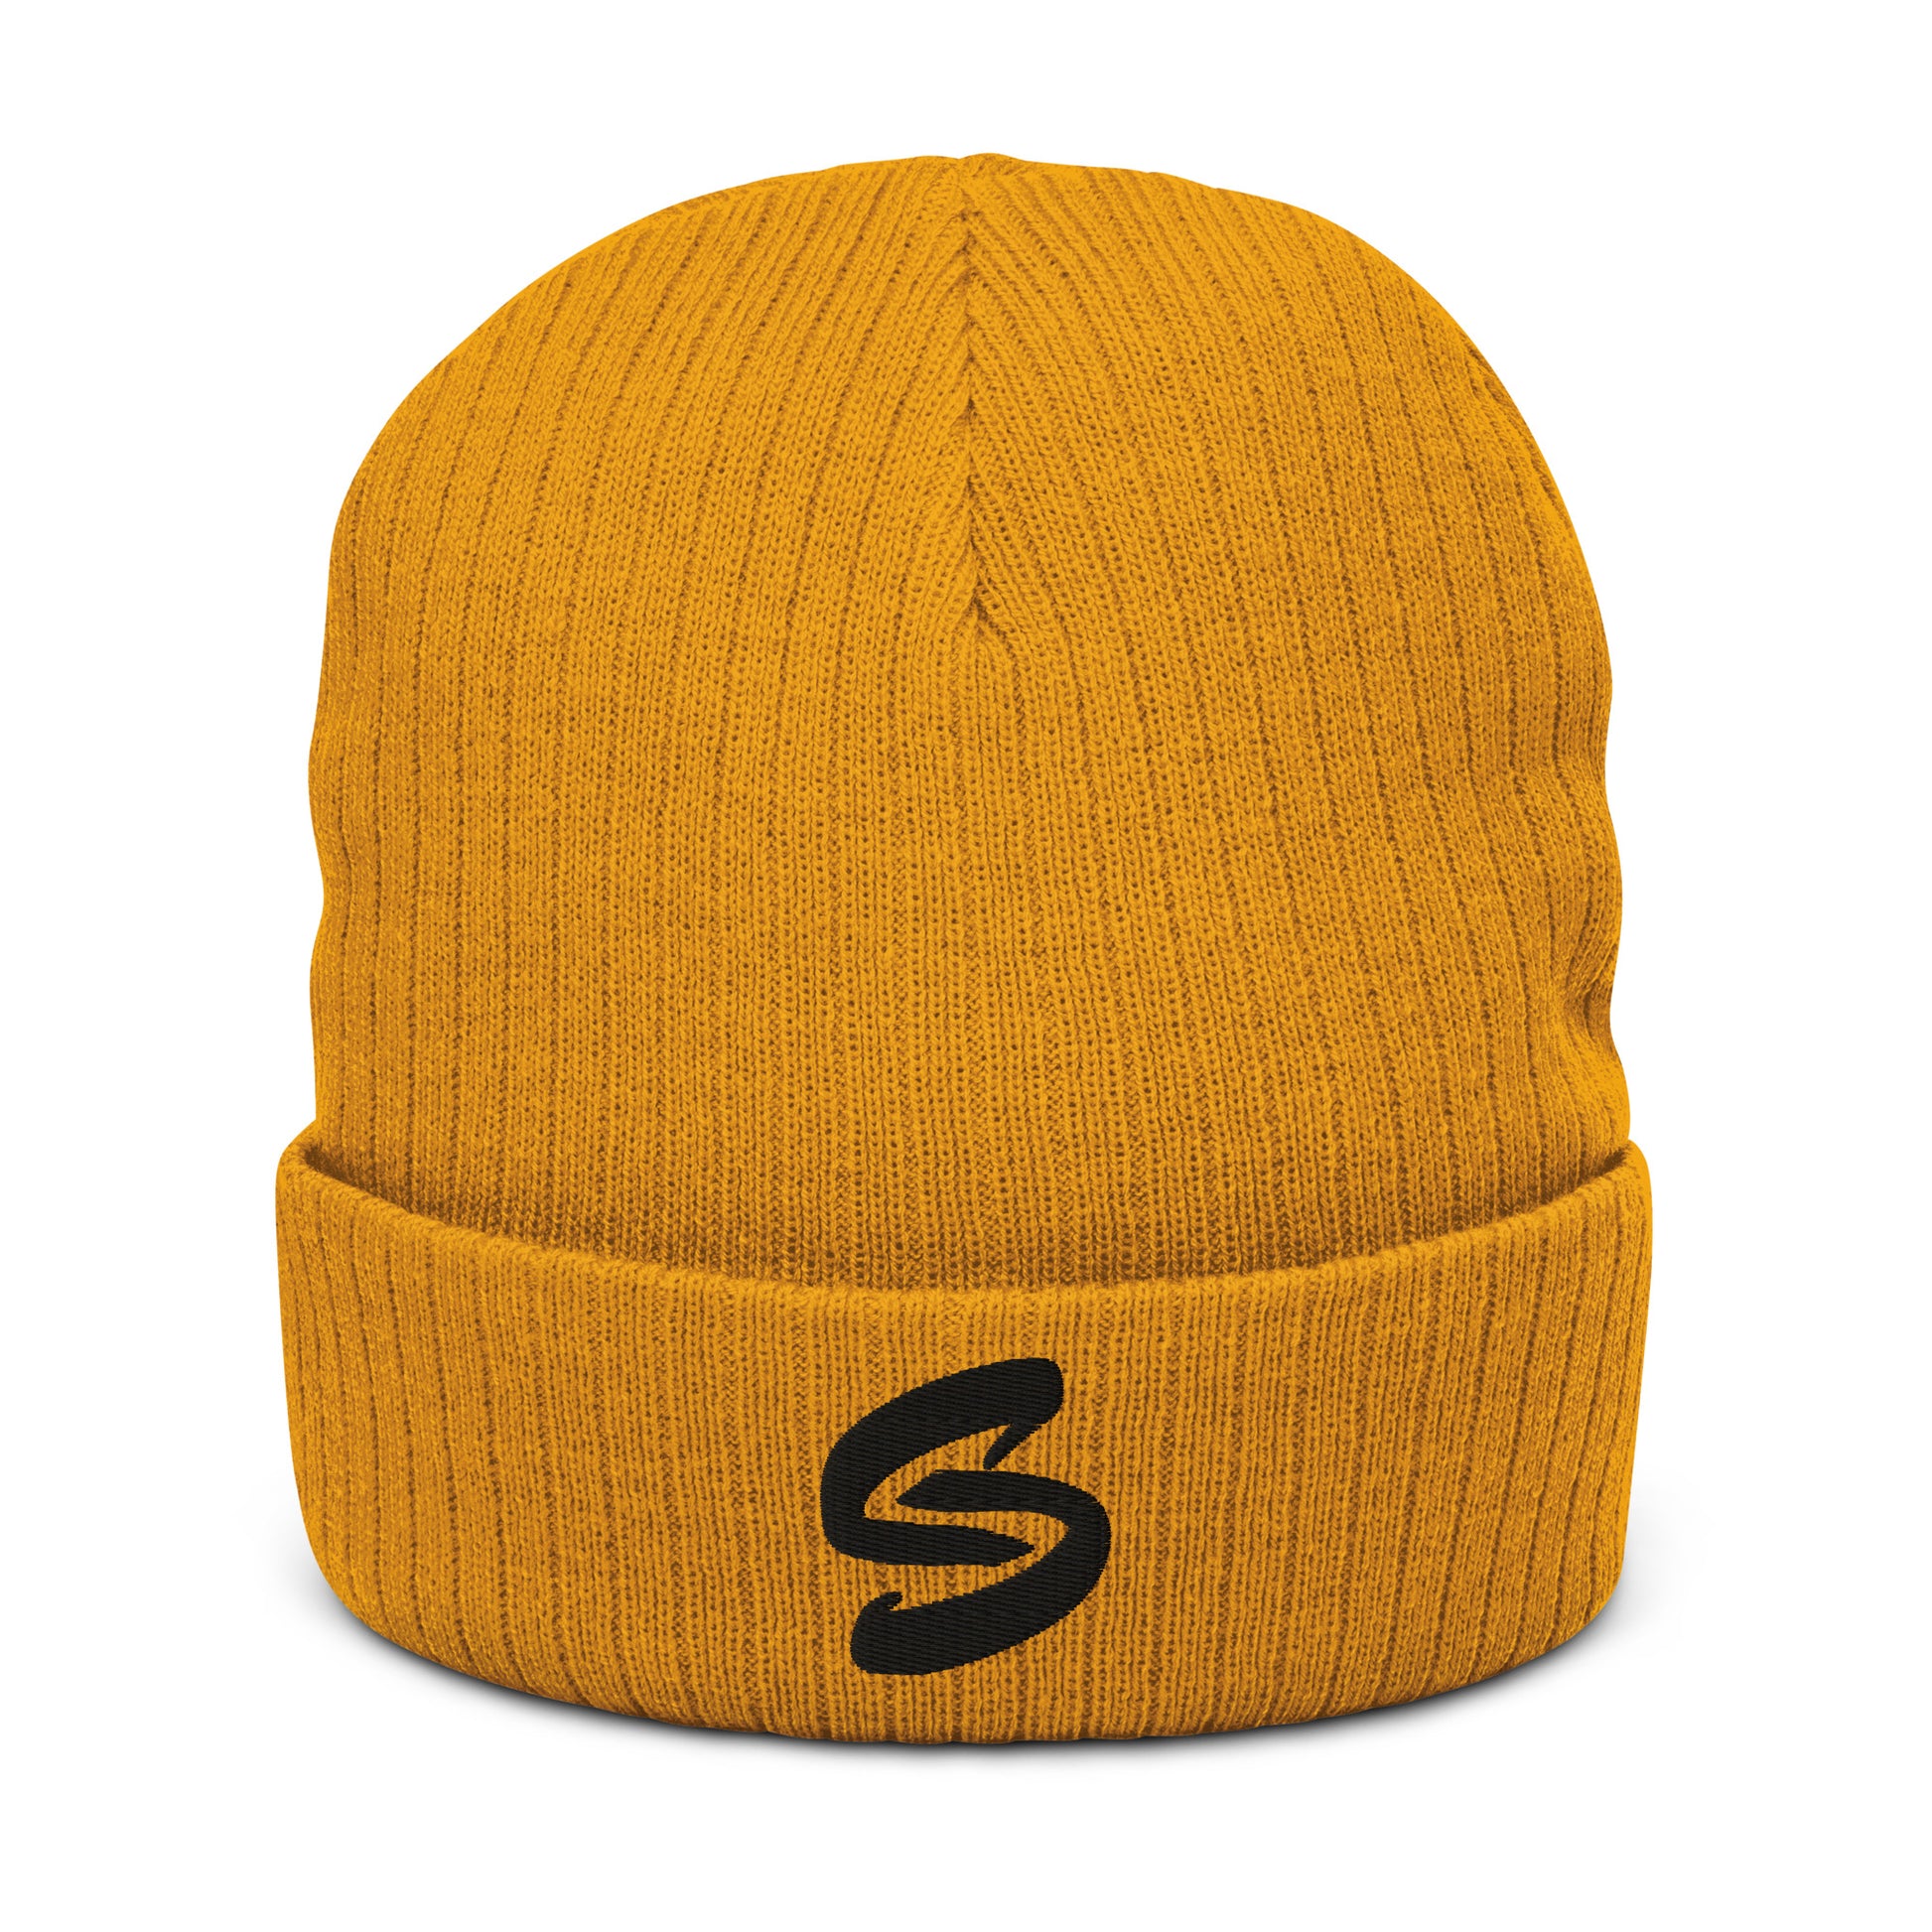 Ribbed knit beanie in recycled polyester and acrylic blend, double-layered with a cuffed design. Stylish, warm, and versatile accessory for all head sizes. Handcrafted on demand to reduce overproduction and promote sustainable choices. 8.27 inches (21 cm) in length. Beanie in "Mustard" Yellow with embroidered Black Send Coalition S logo